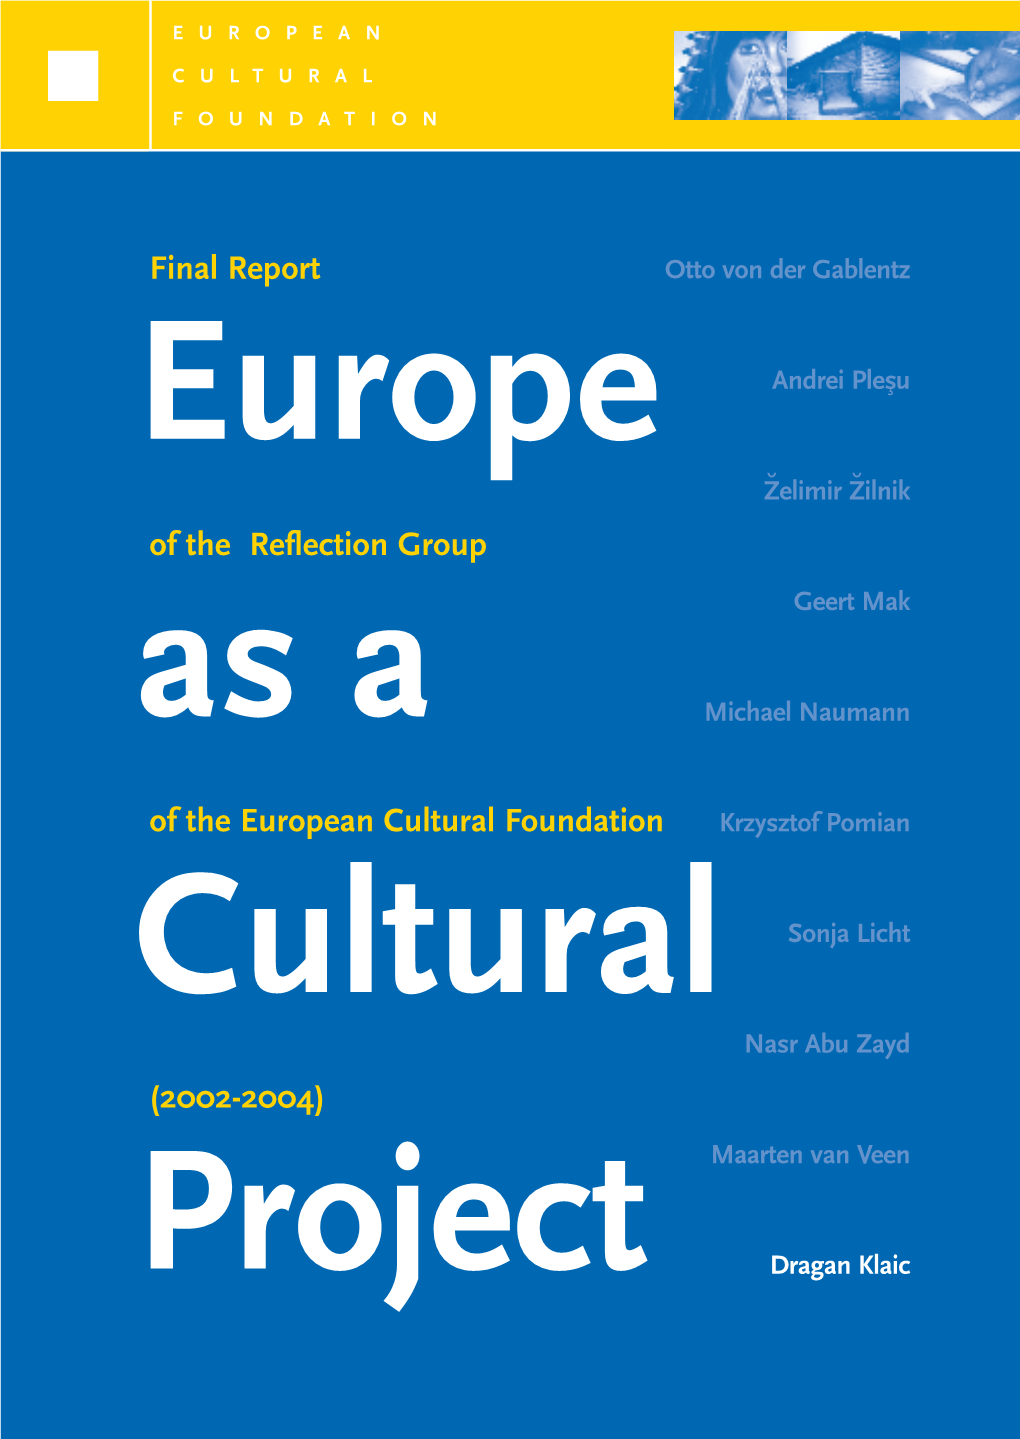 Final Report of the Reflection Group of the European Cultural Foundation (2002-2004)